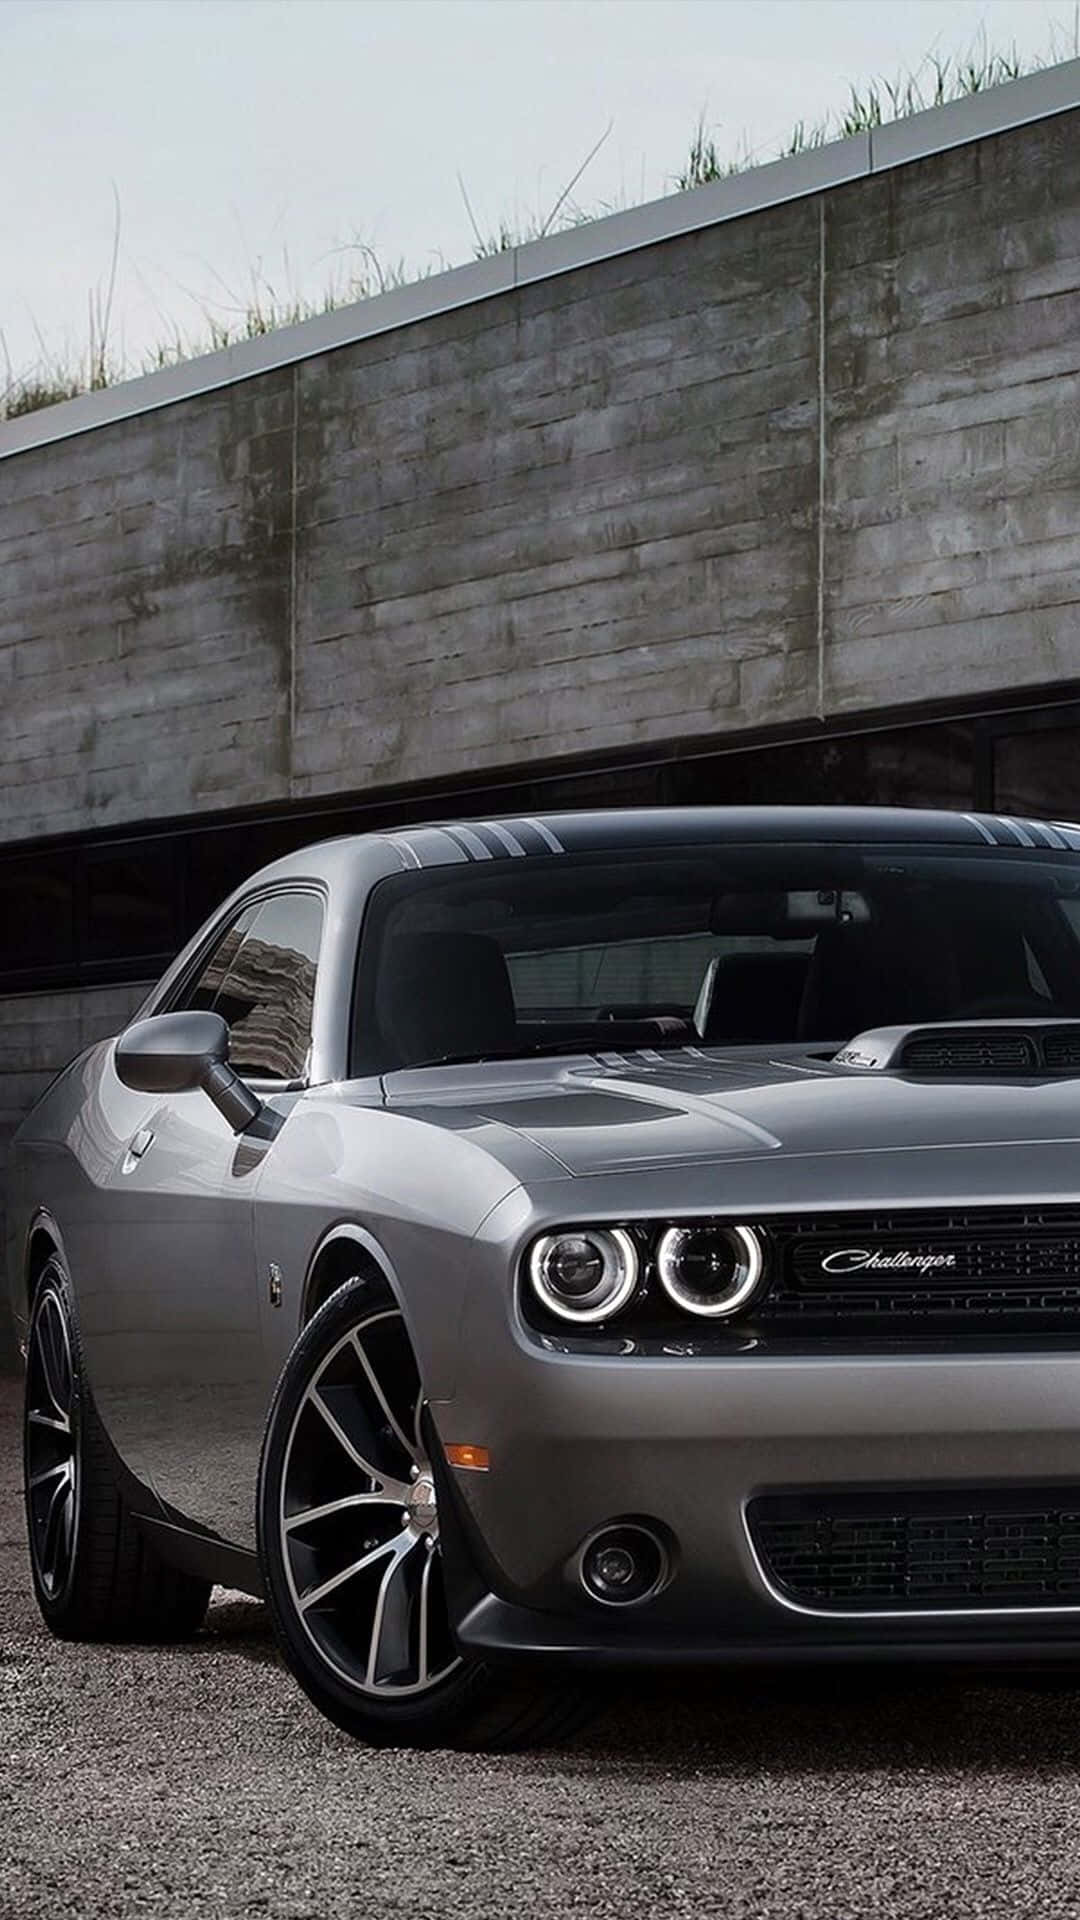 "Feel the power of the Dodge Charger with this exclusive iPhone wallpaper.” Wallpaper